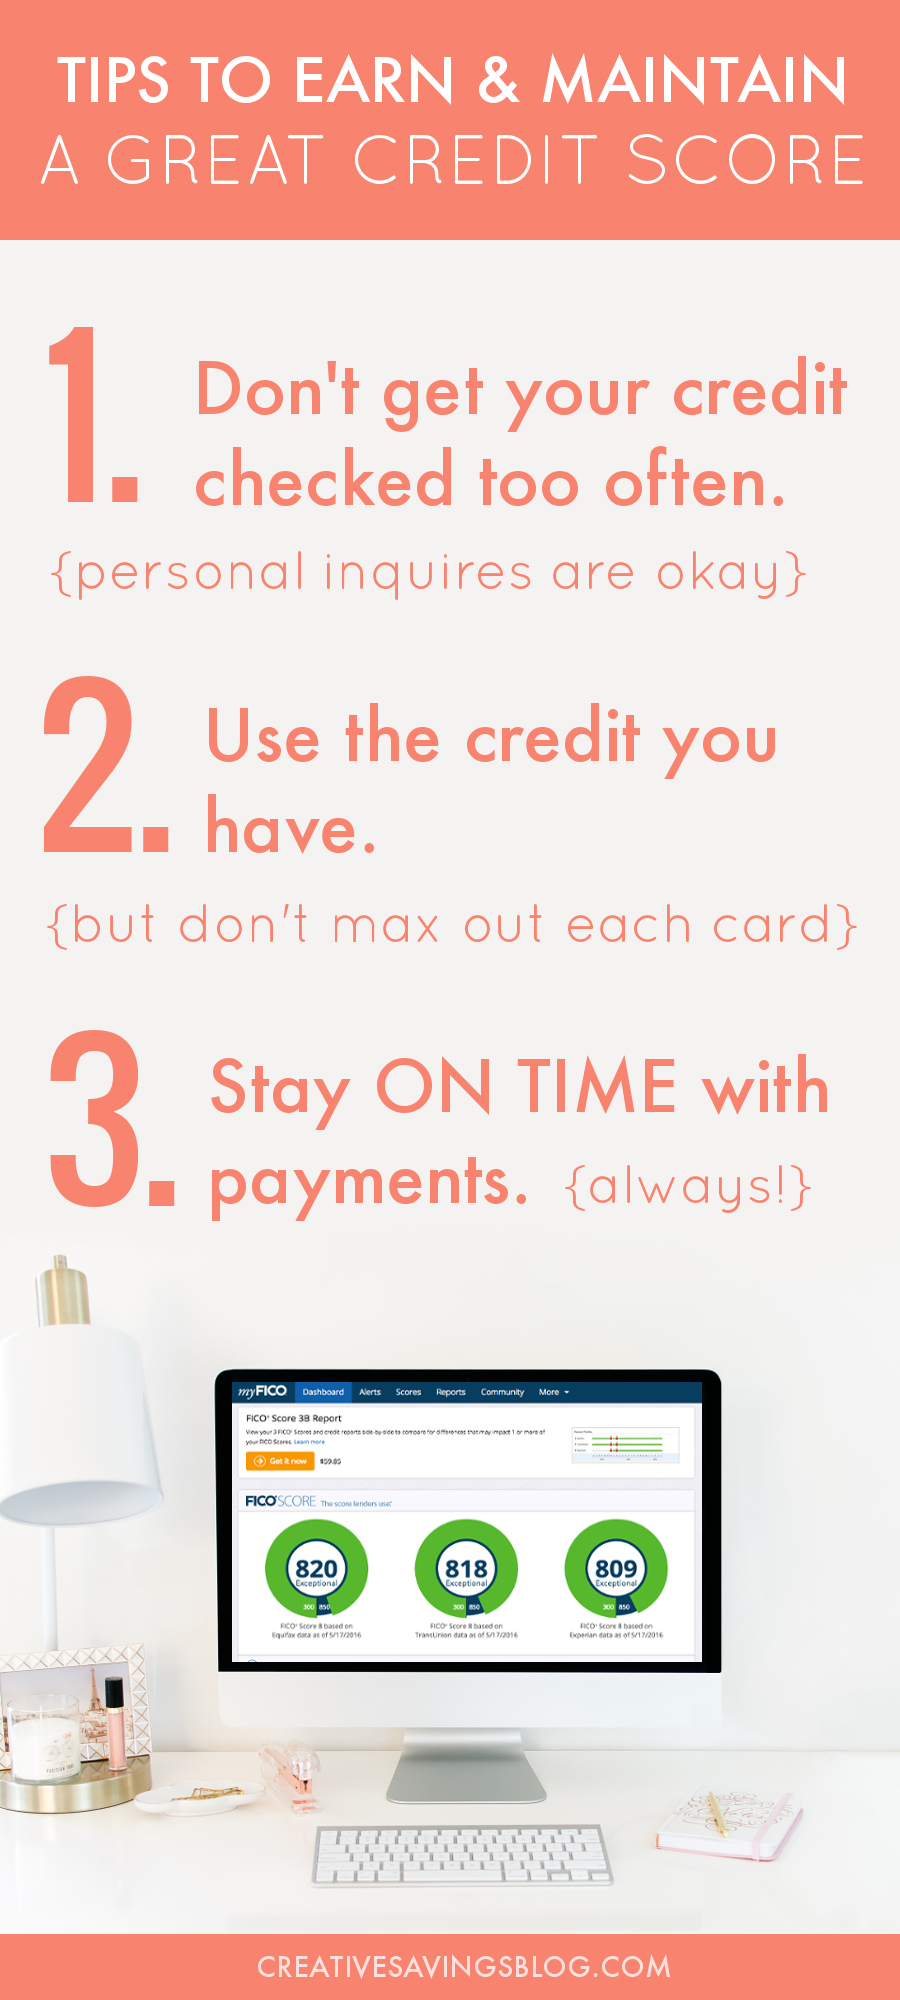 Confused about credit scores? These tried-and-true tips help you earn and maintain a great credit score for years to come!